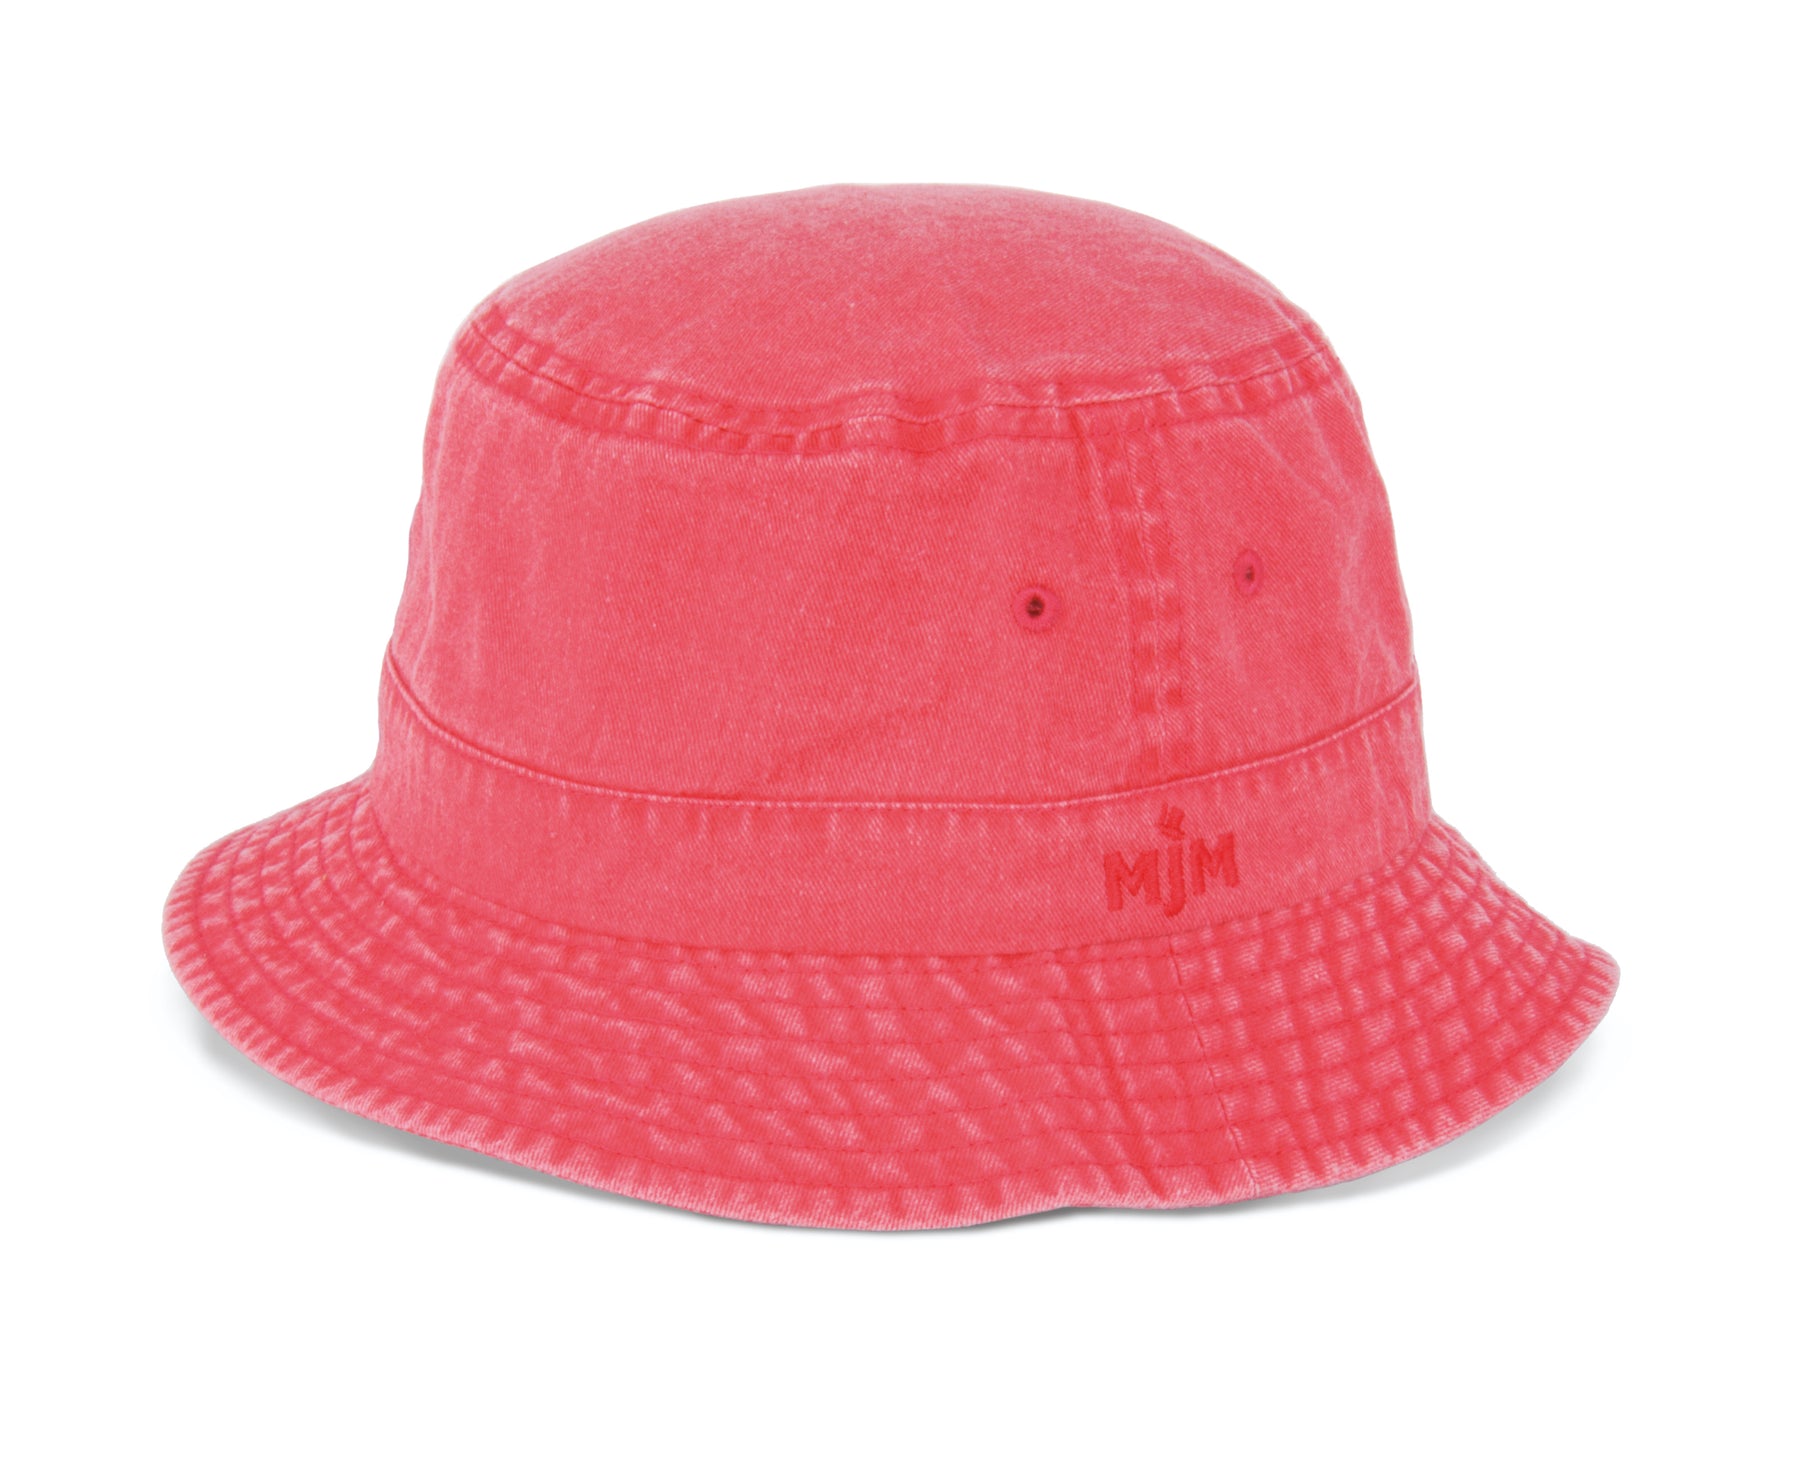 MJM Bucket Dyed Cotton Twill Red